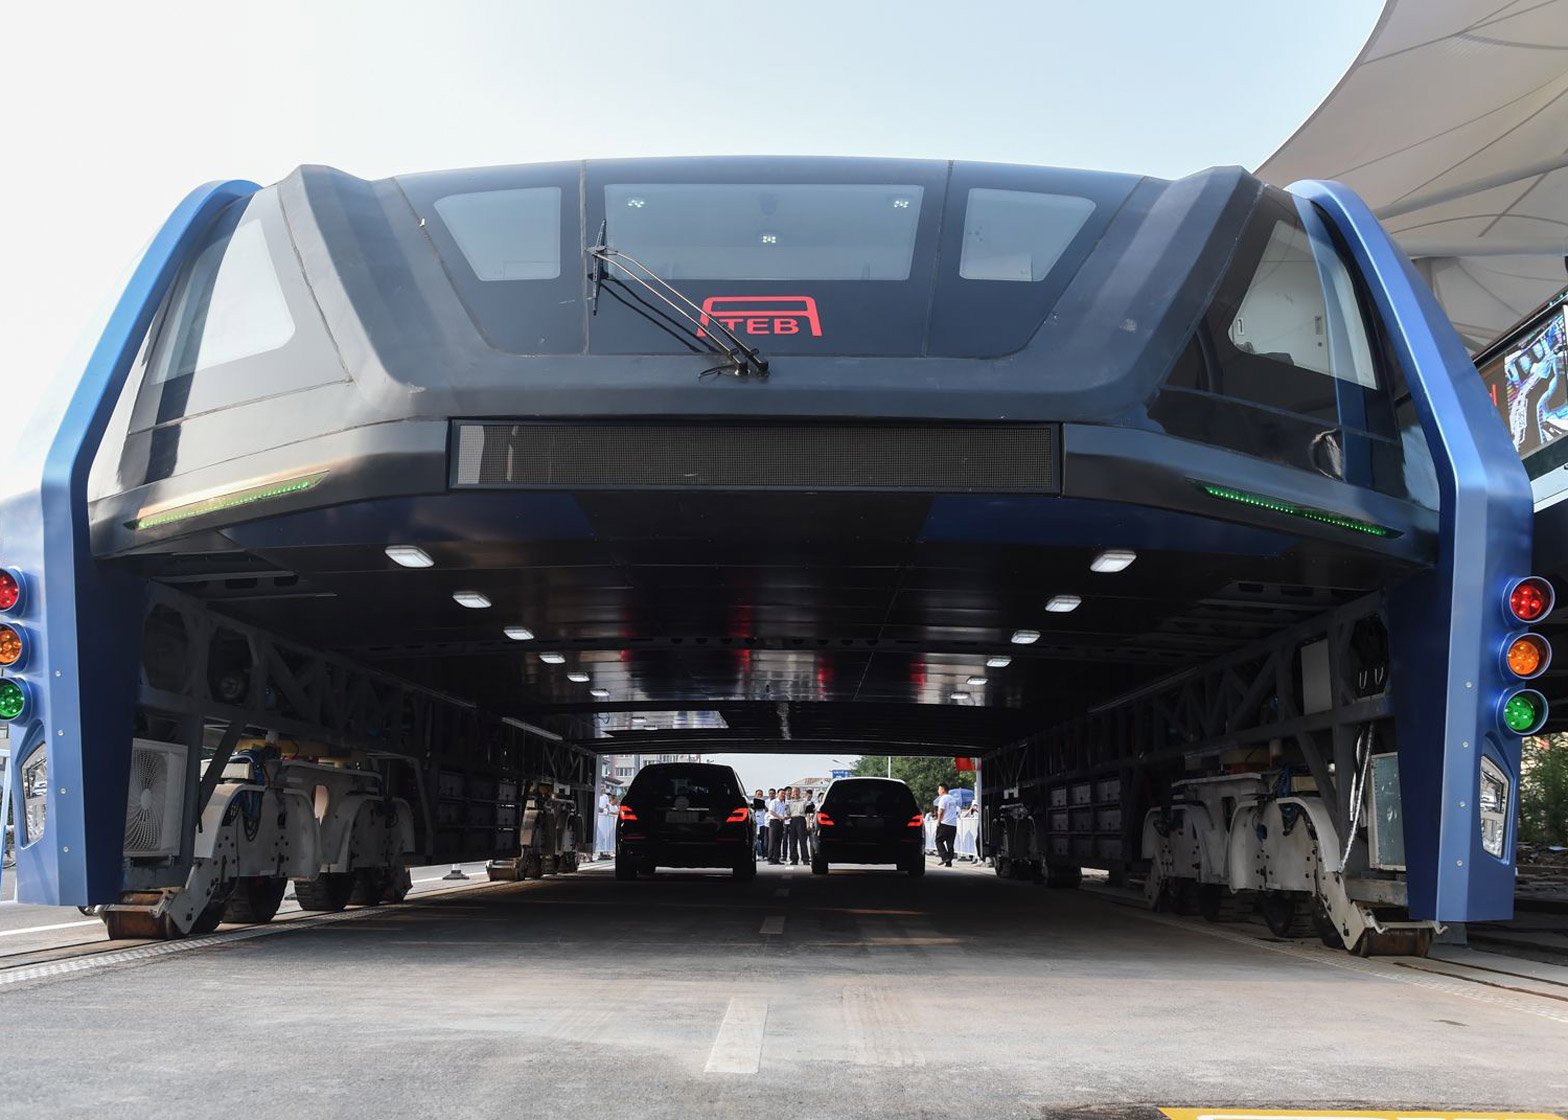 China’s Elevated “Straddling” Bus Is A Reality Now, India Interested To Adopt It As Well